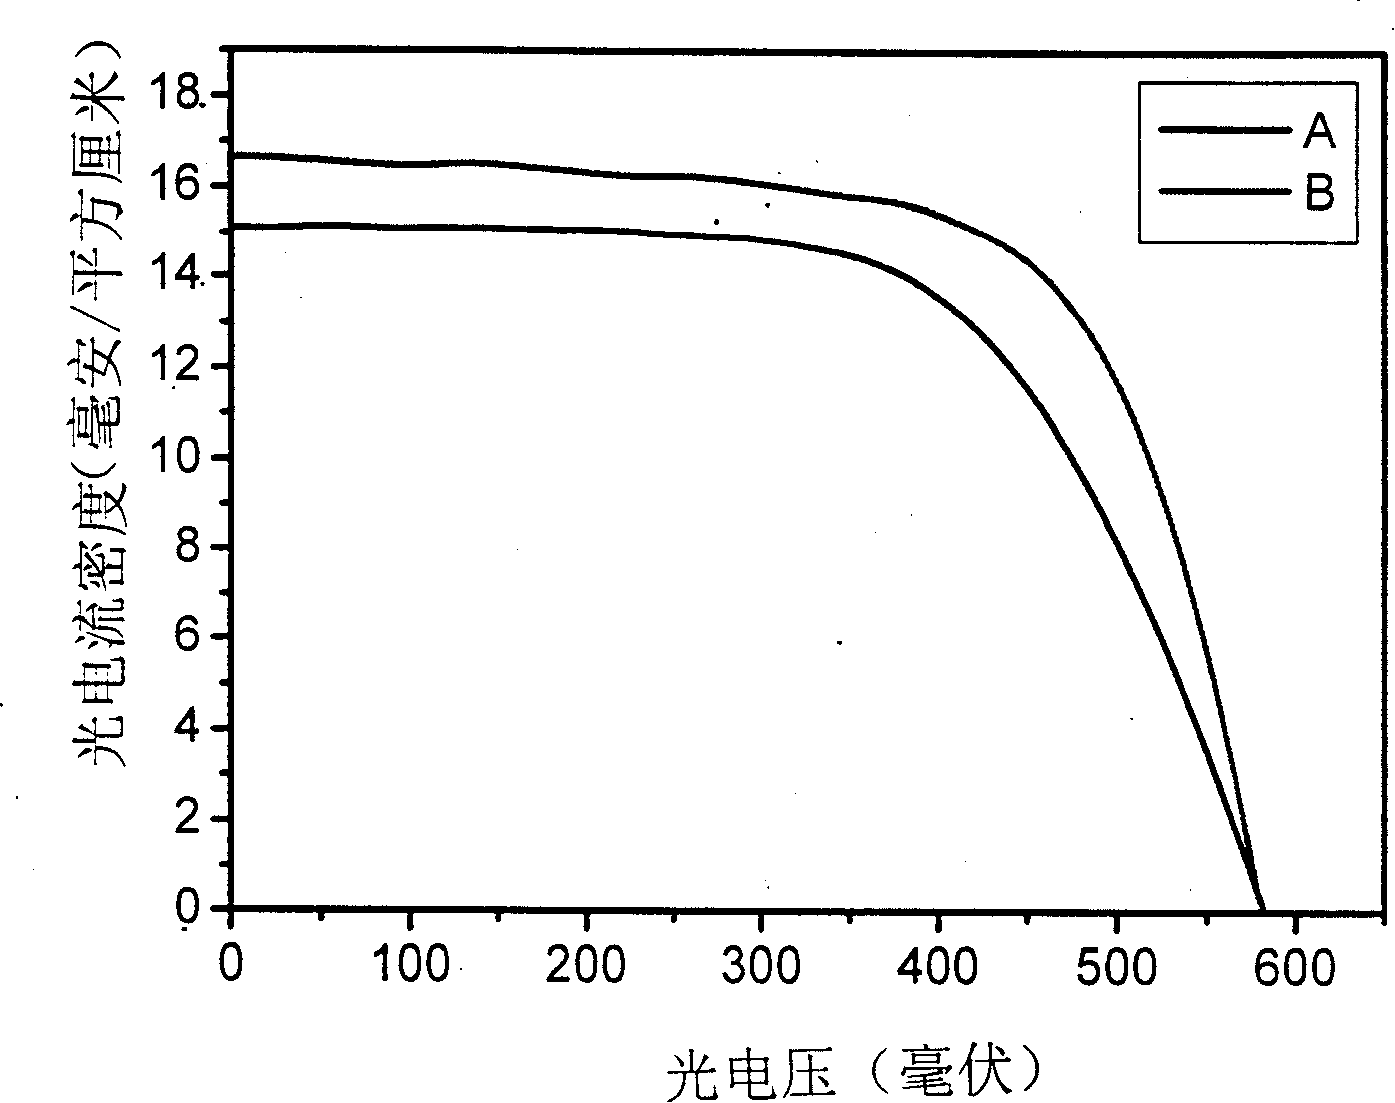 Carbon plasm for electrode of dye sensitization solar battery pair and its making method